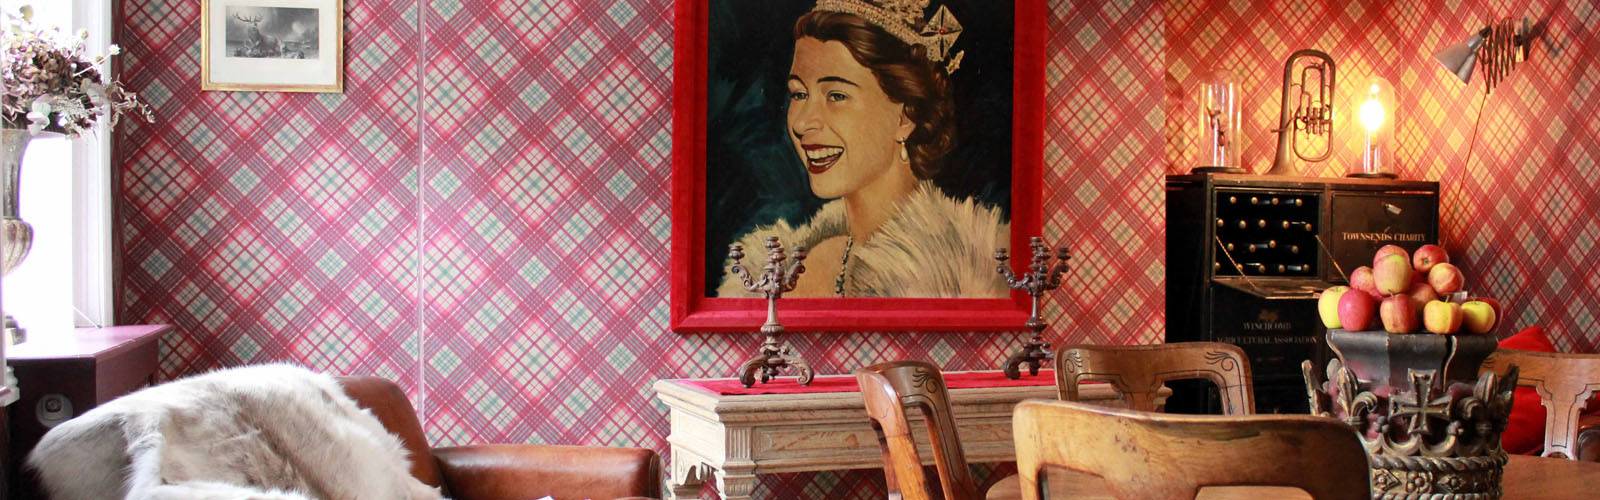 Unusual dining room with a painting of the Queen.